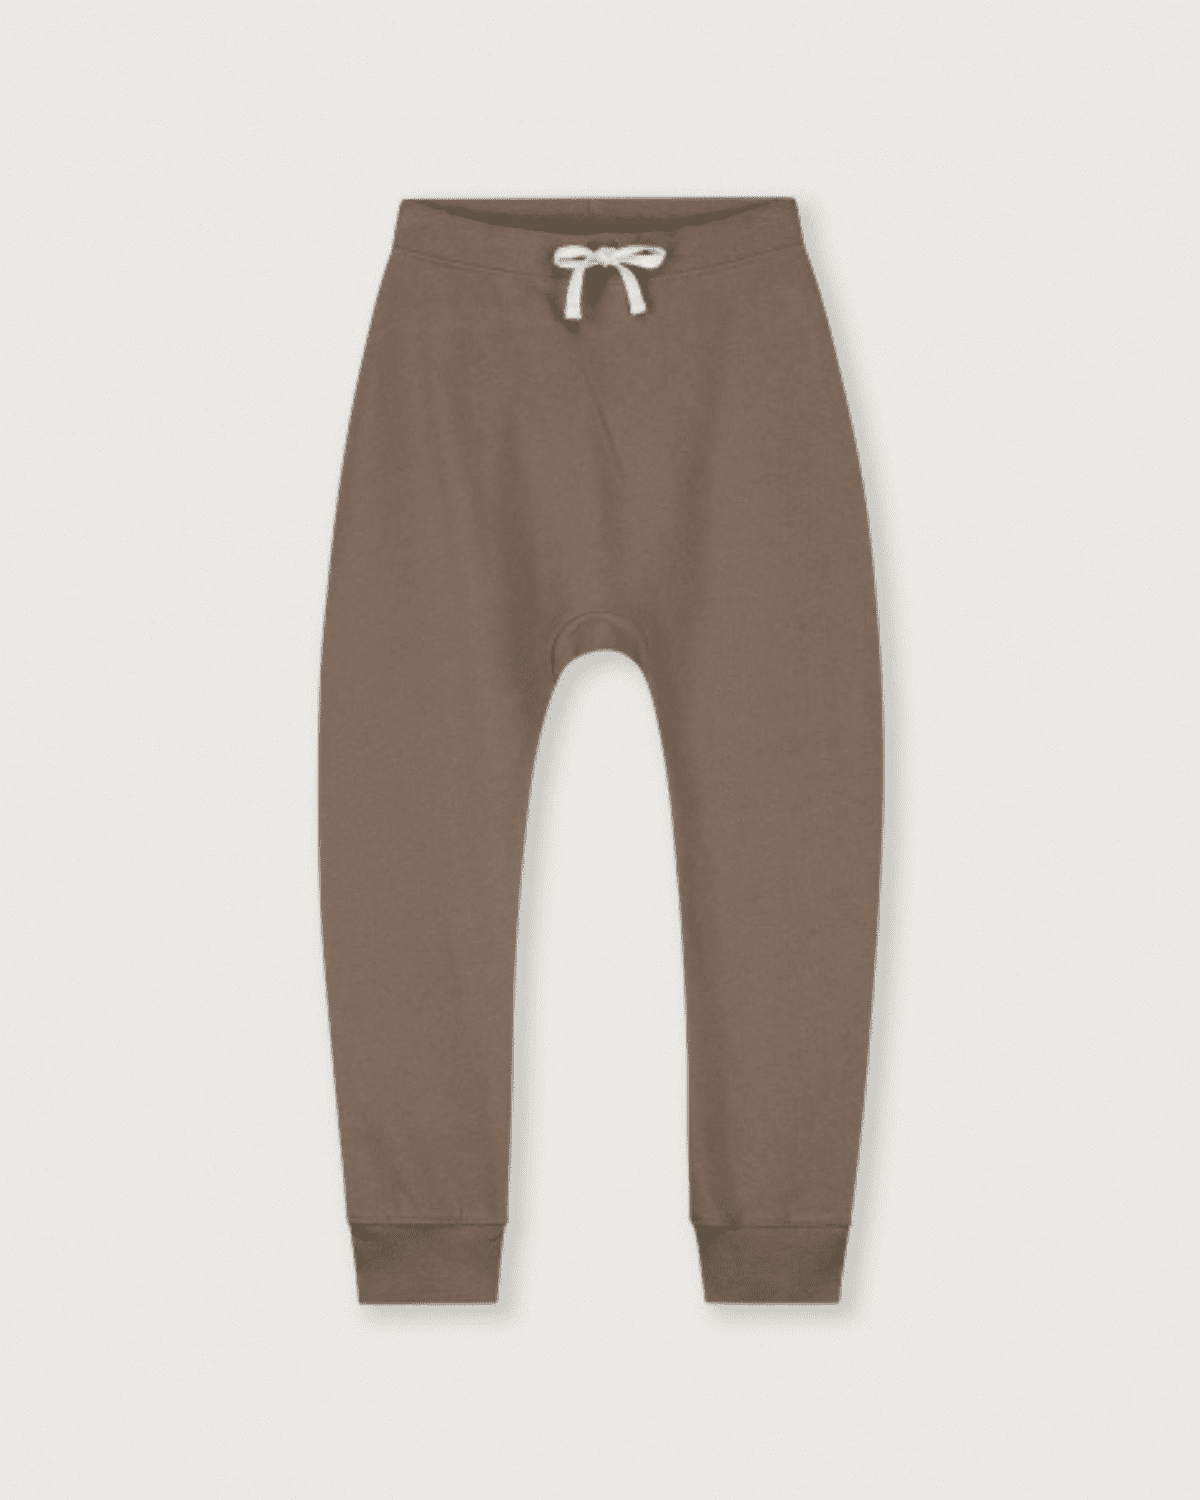 Gray Label Baggy Pants at OAT & OCHRE - Organic Cotton  Kids Clothing